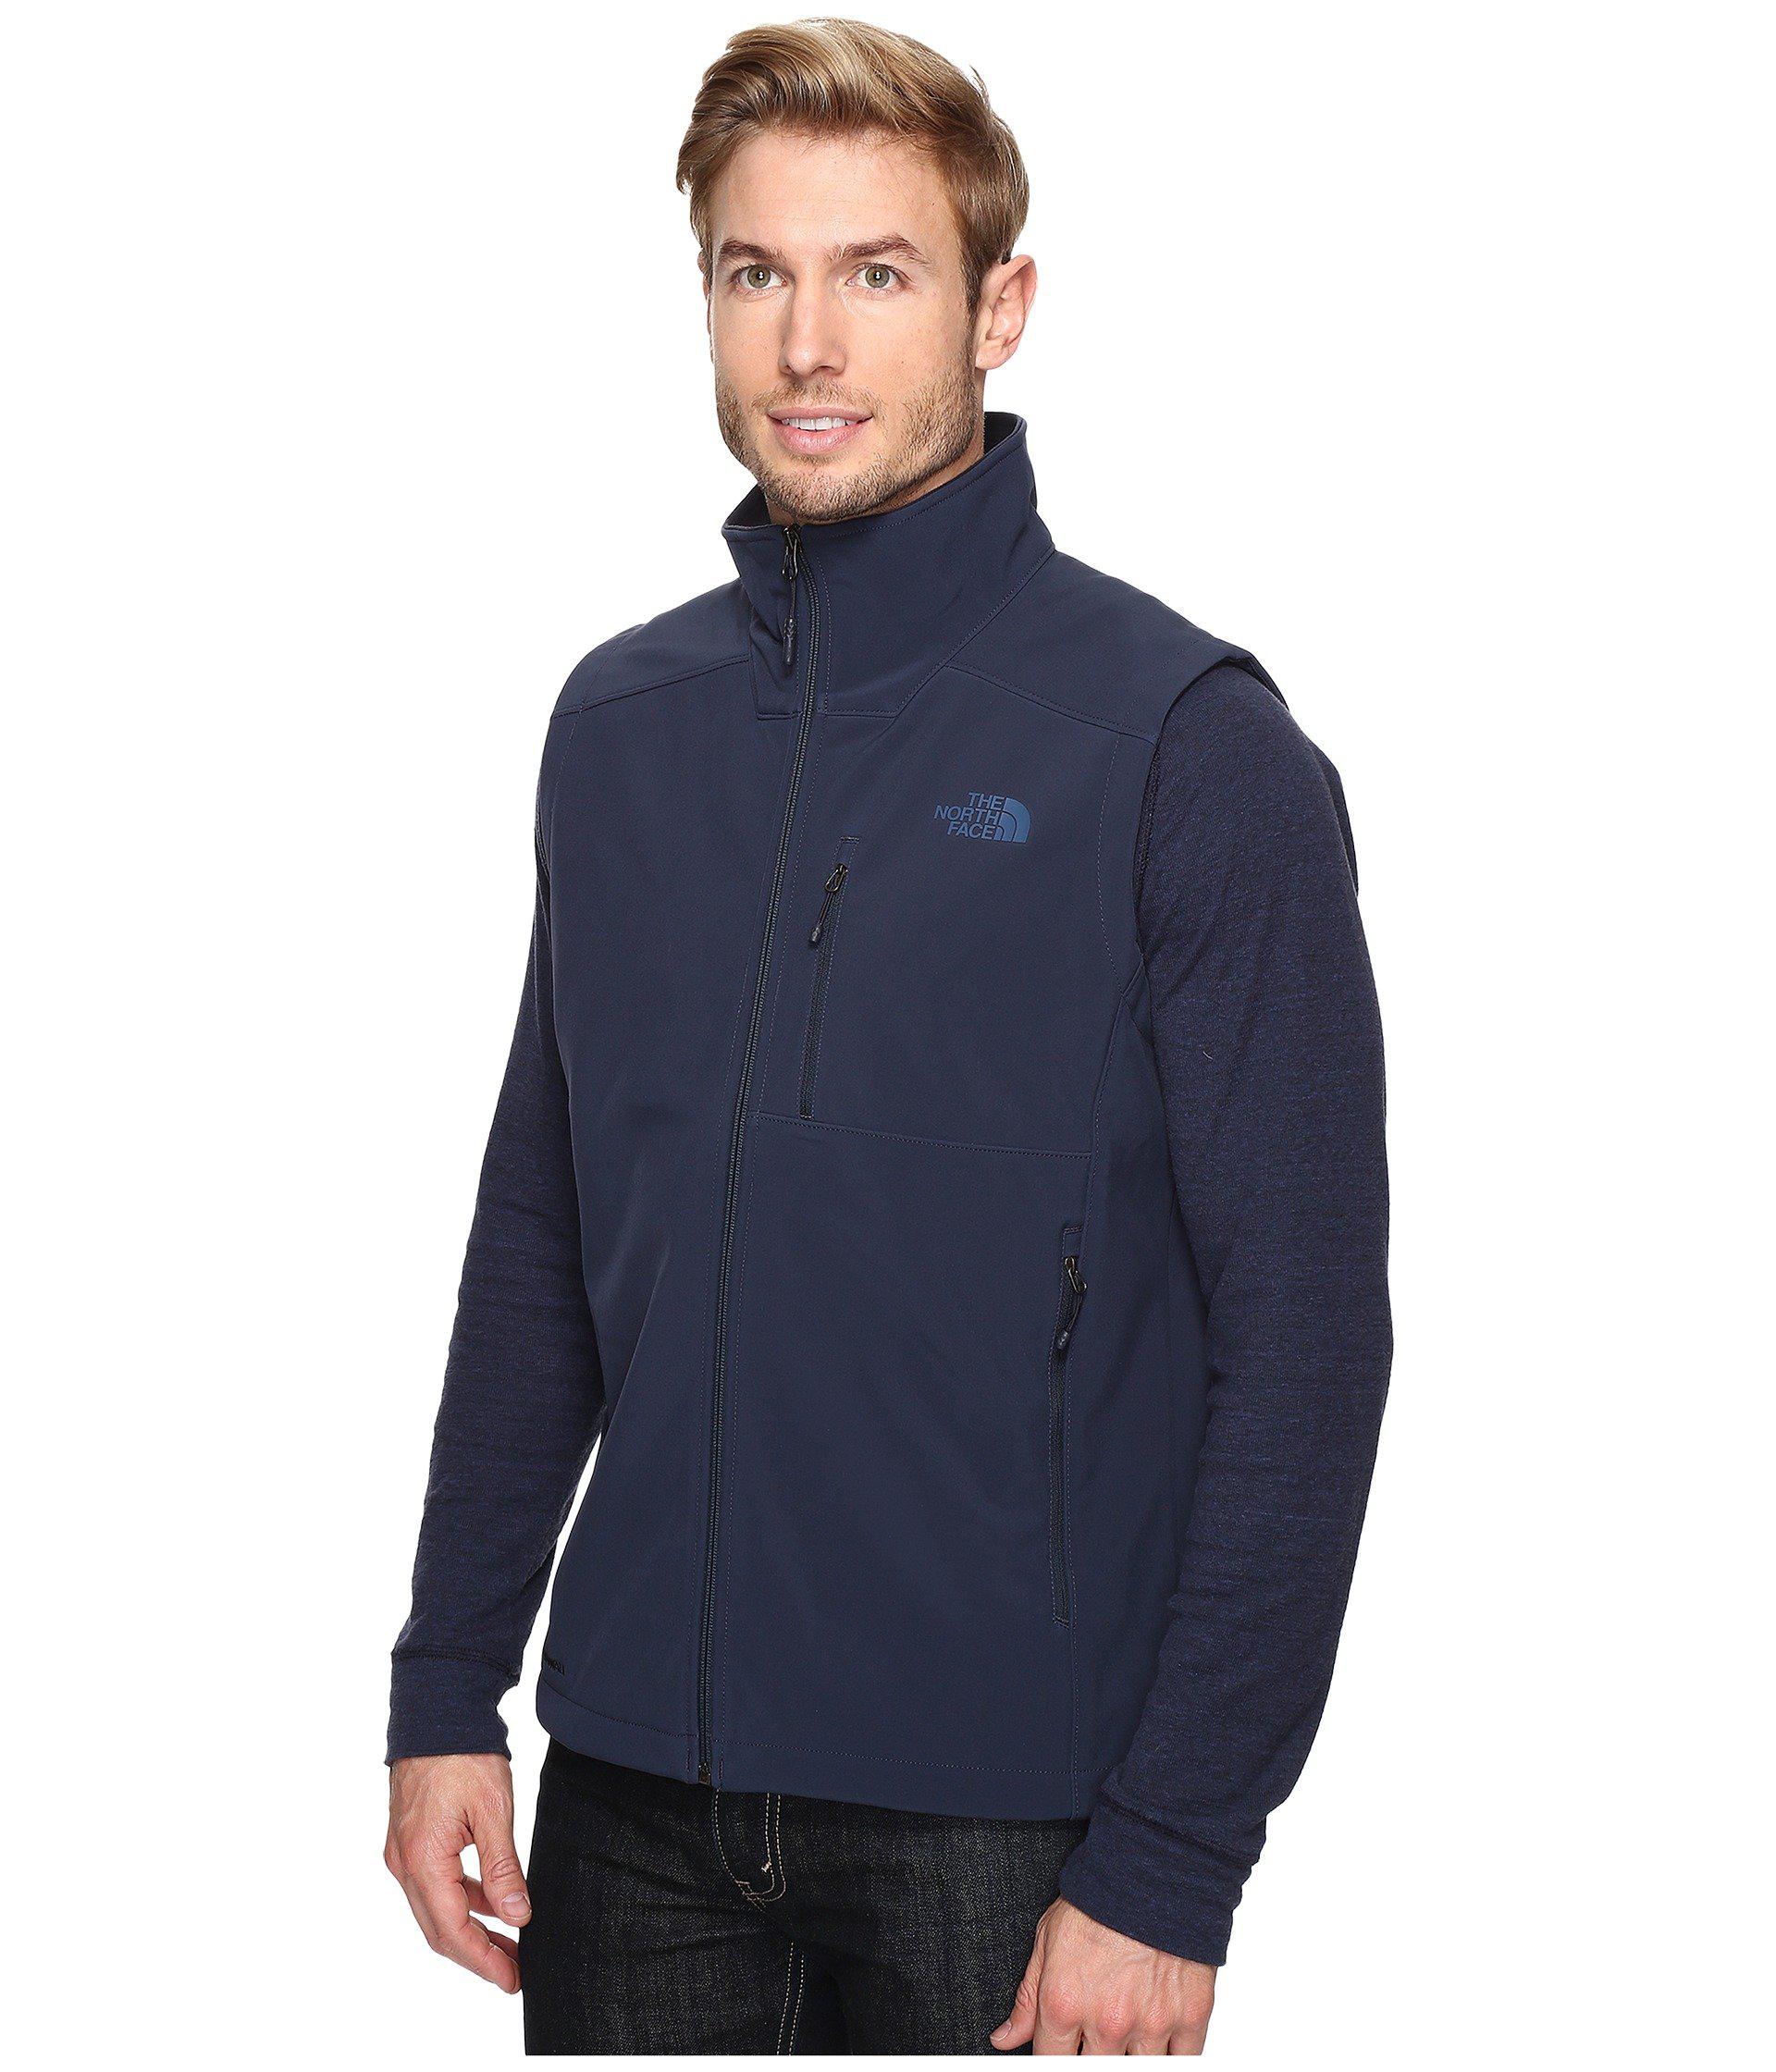 The North Face Apex Bionic 2 Vest in Blue for Men - Lyst